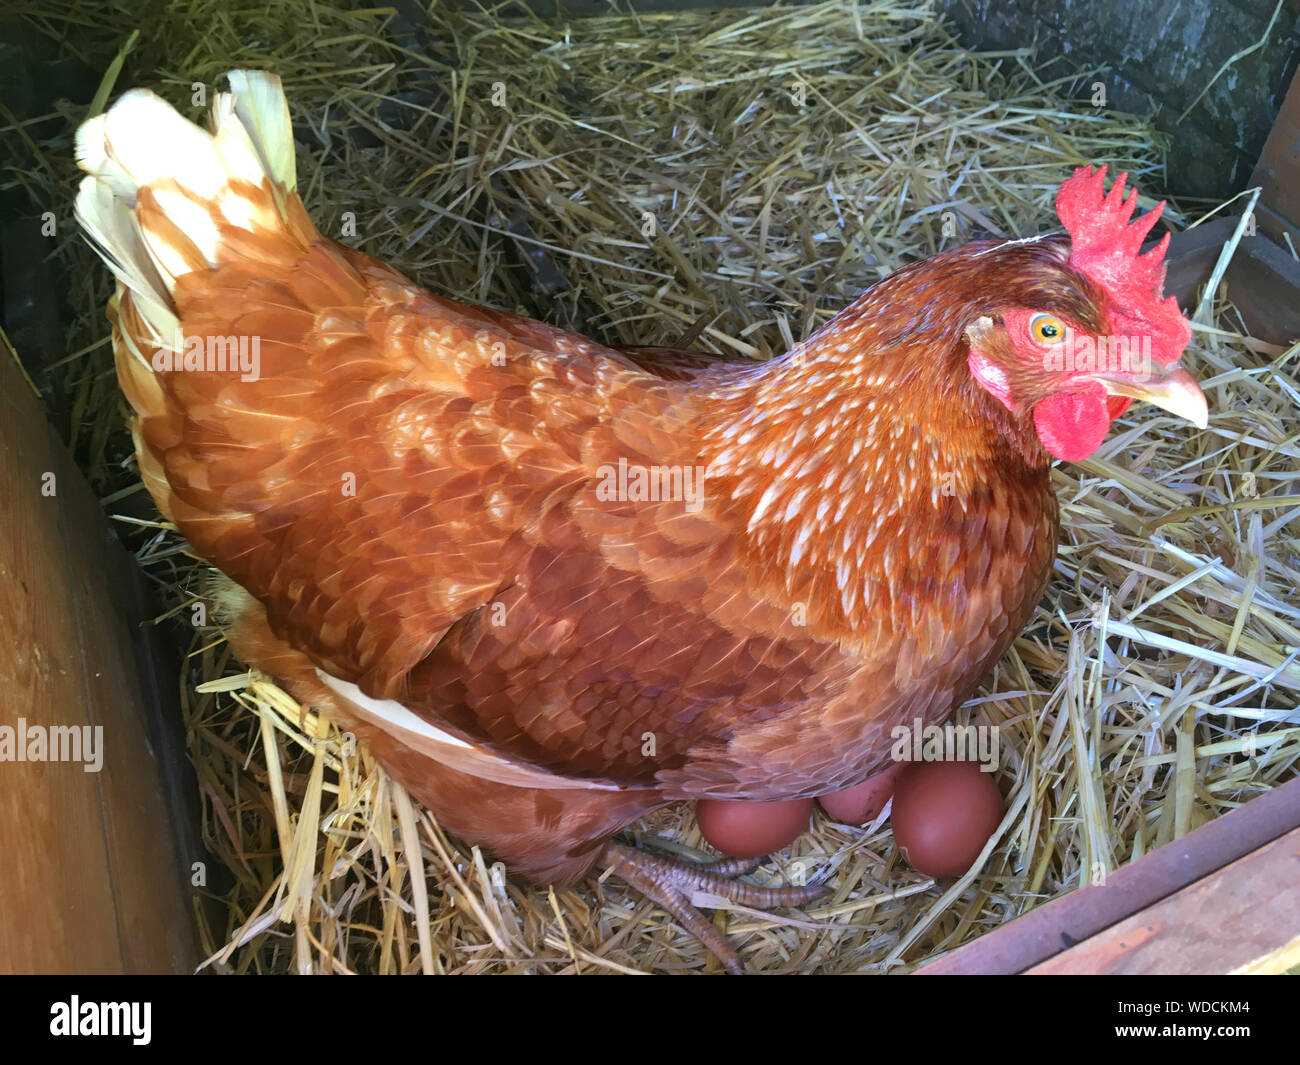 Happy healthy free range / freerange hen / chicken sitting on eggs she's laid on straw in her coop. The hens are kept by a family in their domestic garden. UK. The mature hen was taken home and kept by parents after a 'Chick Hatching In Schools' project / activity. (stomo) Stock Photo